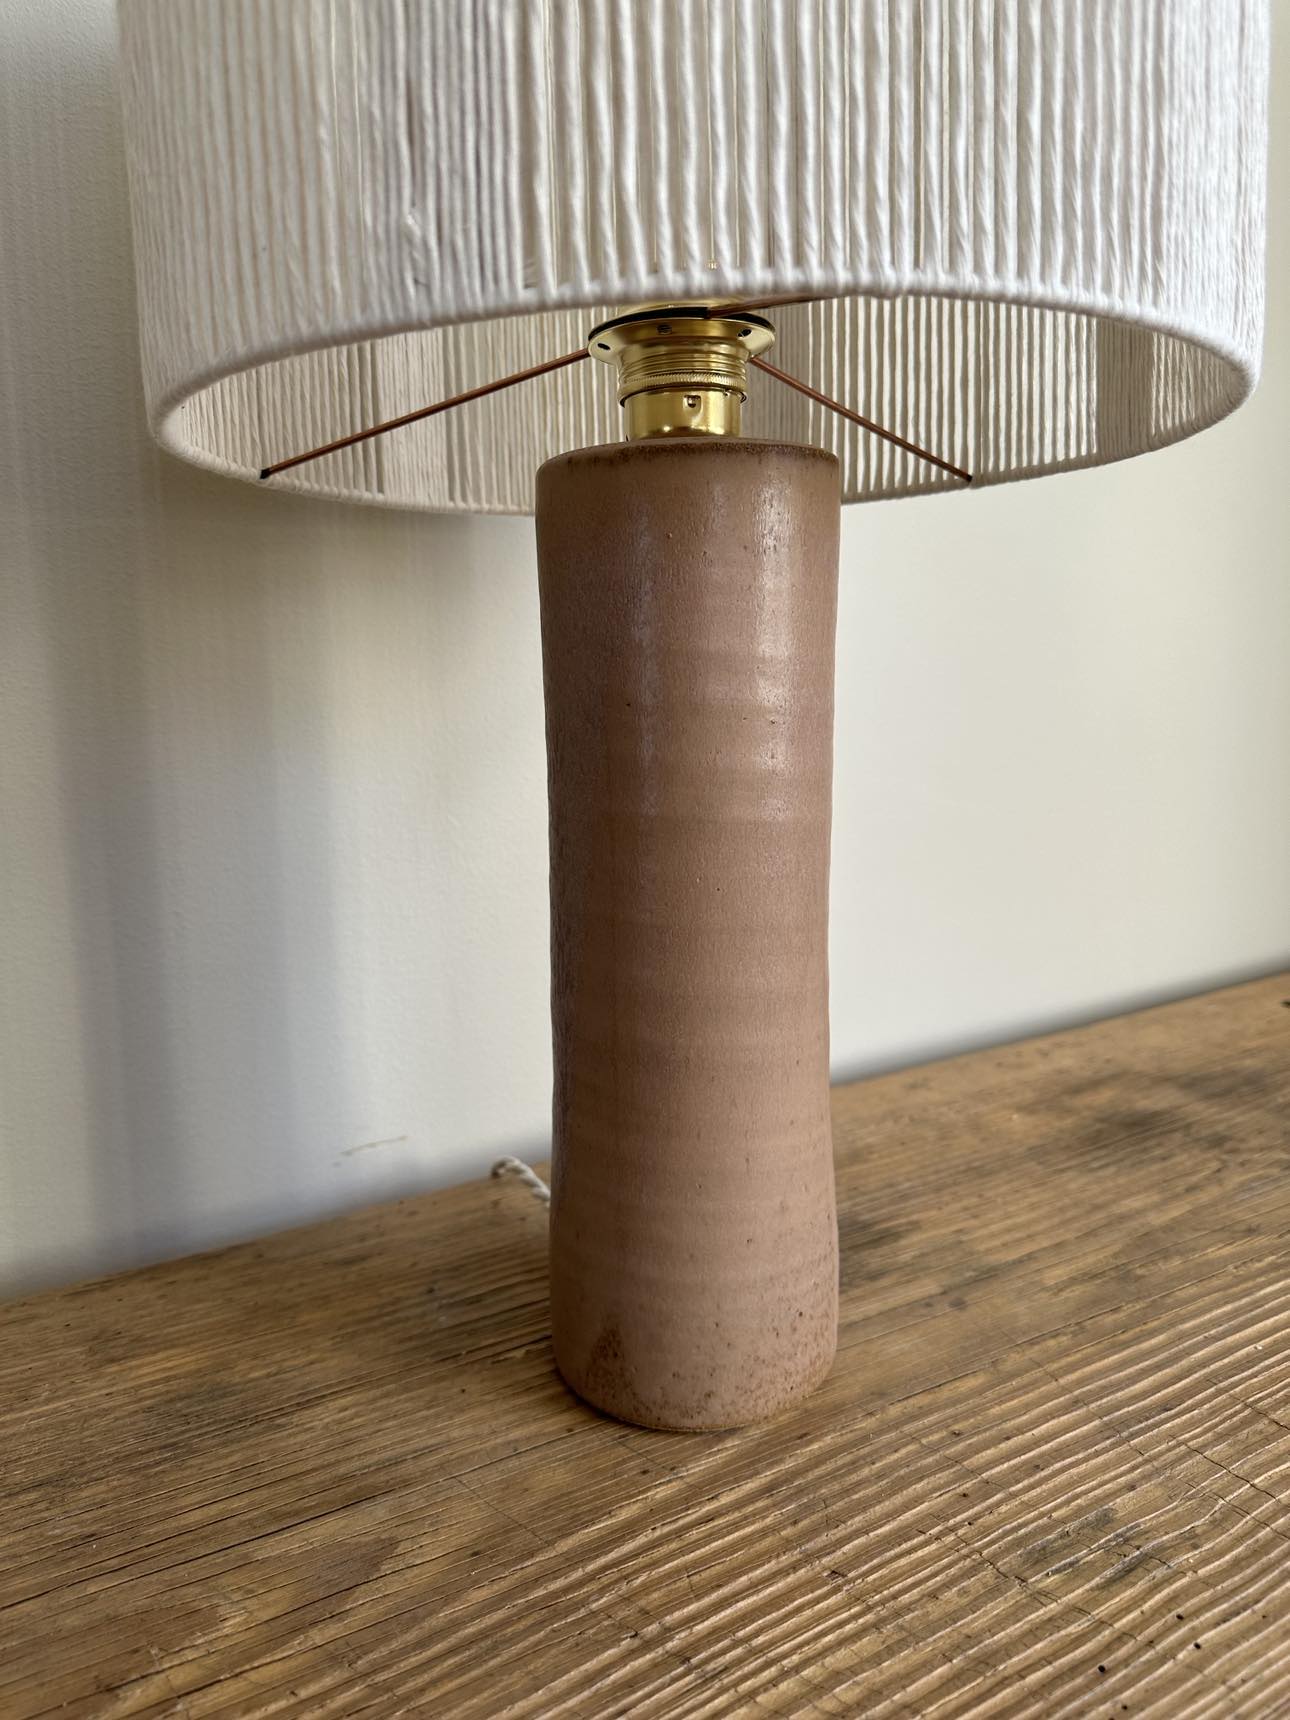 Terre table lamp